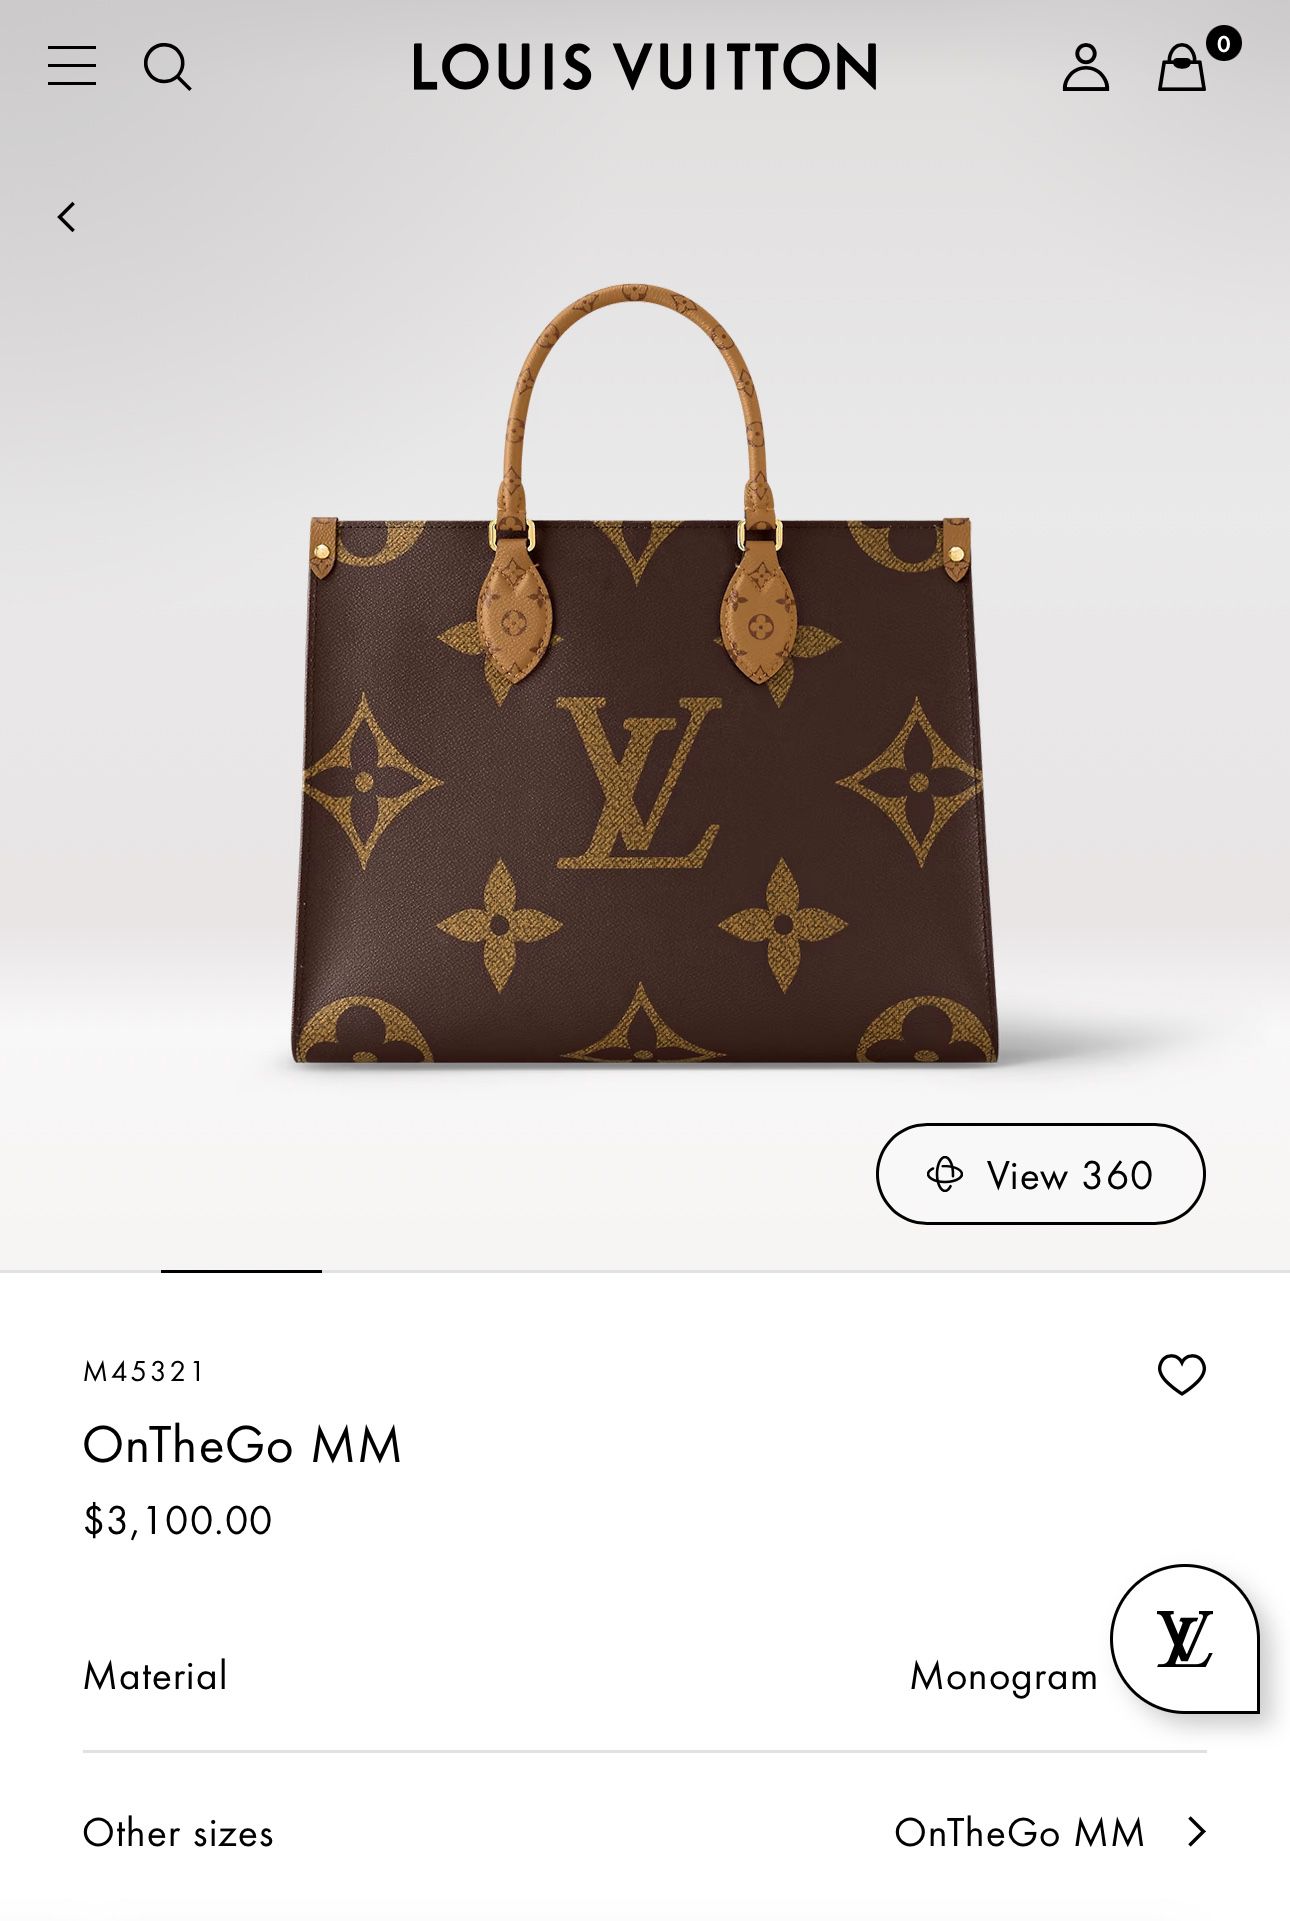 LV OnTheGo MM Tote